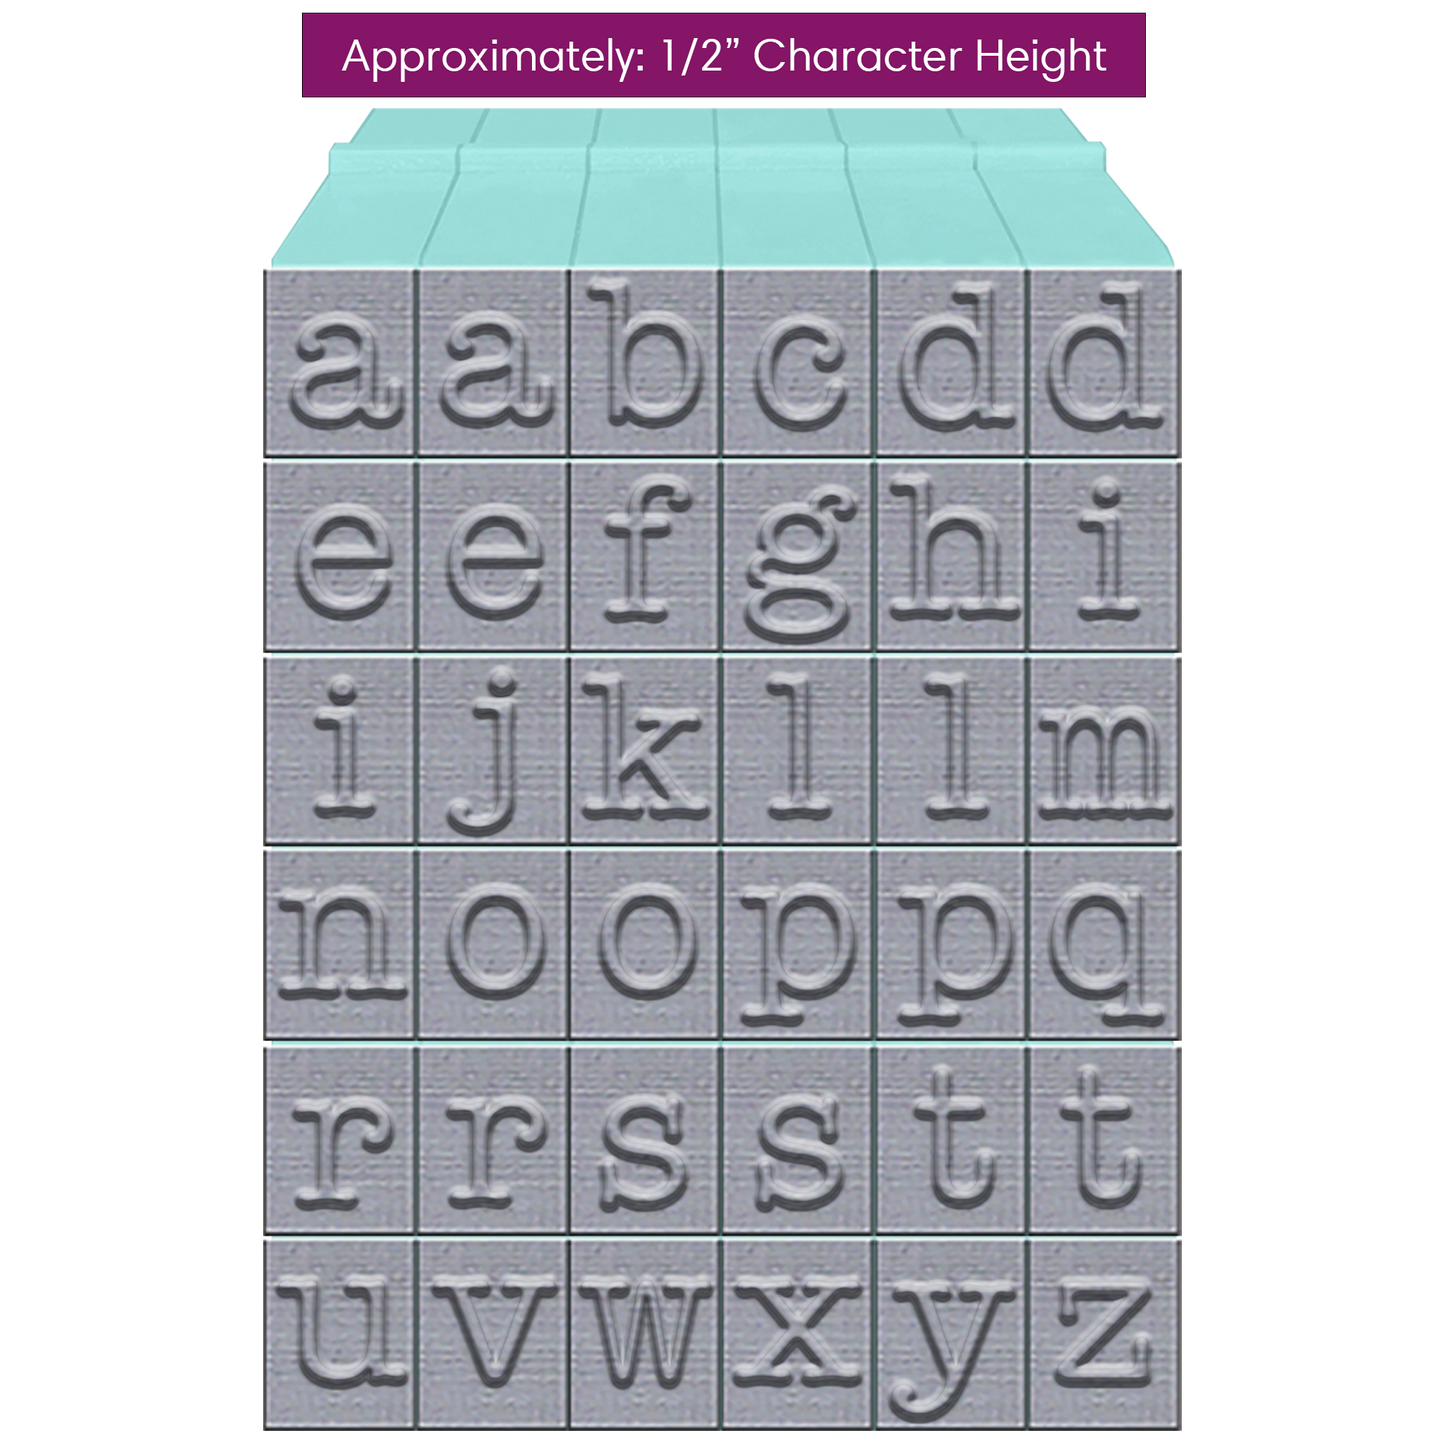 Pegz Connectable Alphabet Stamps For Personalised Stamping